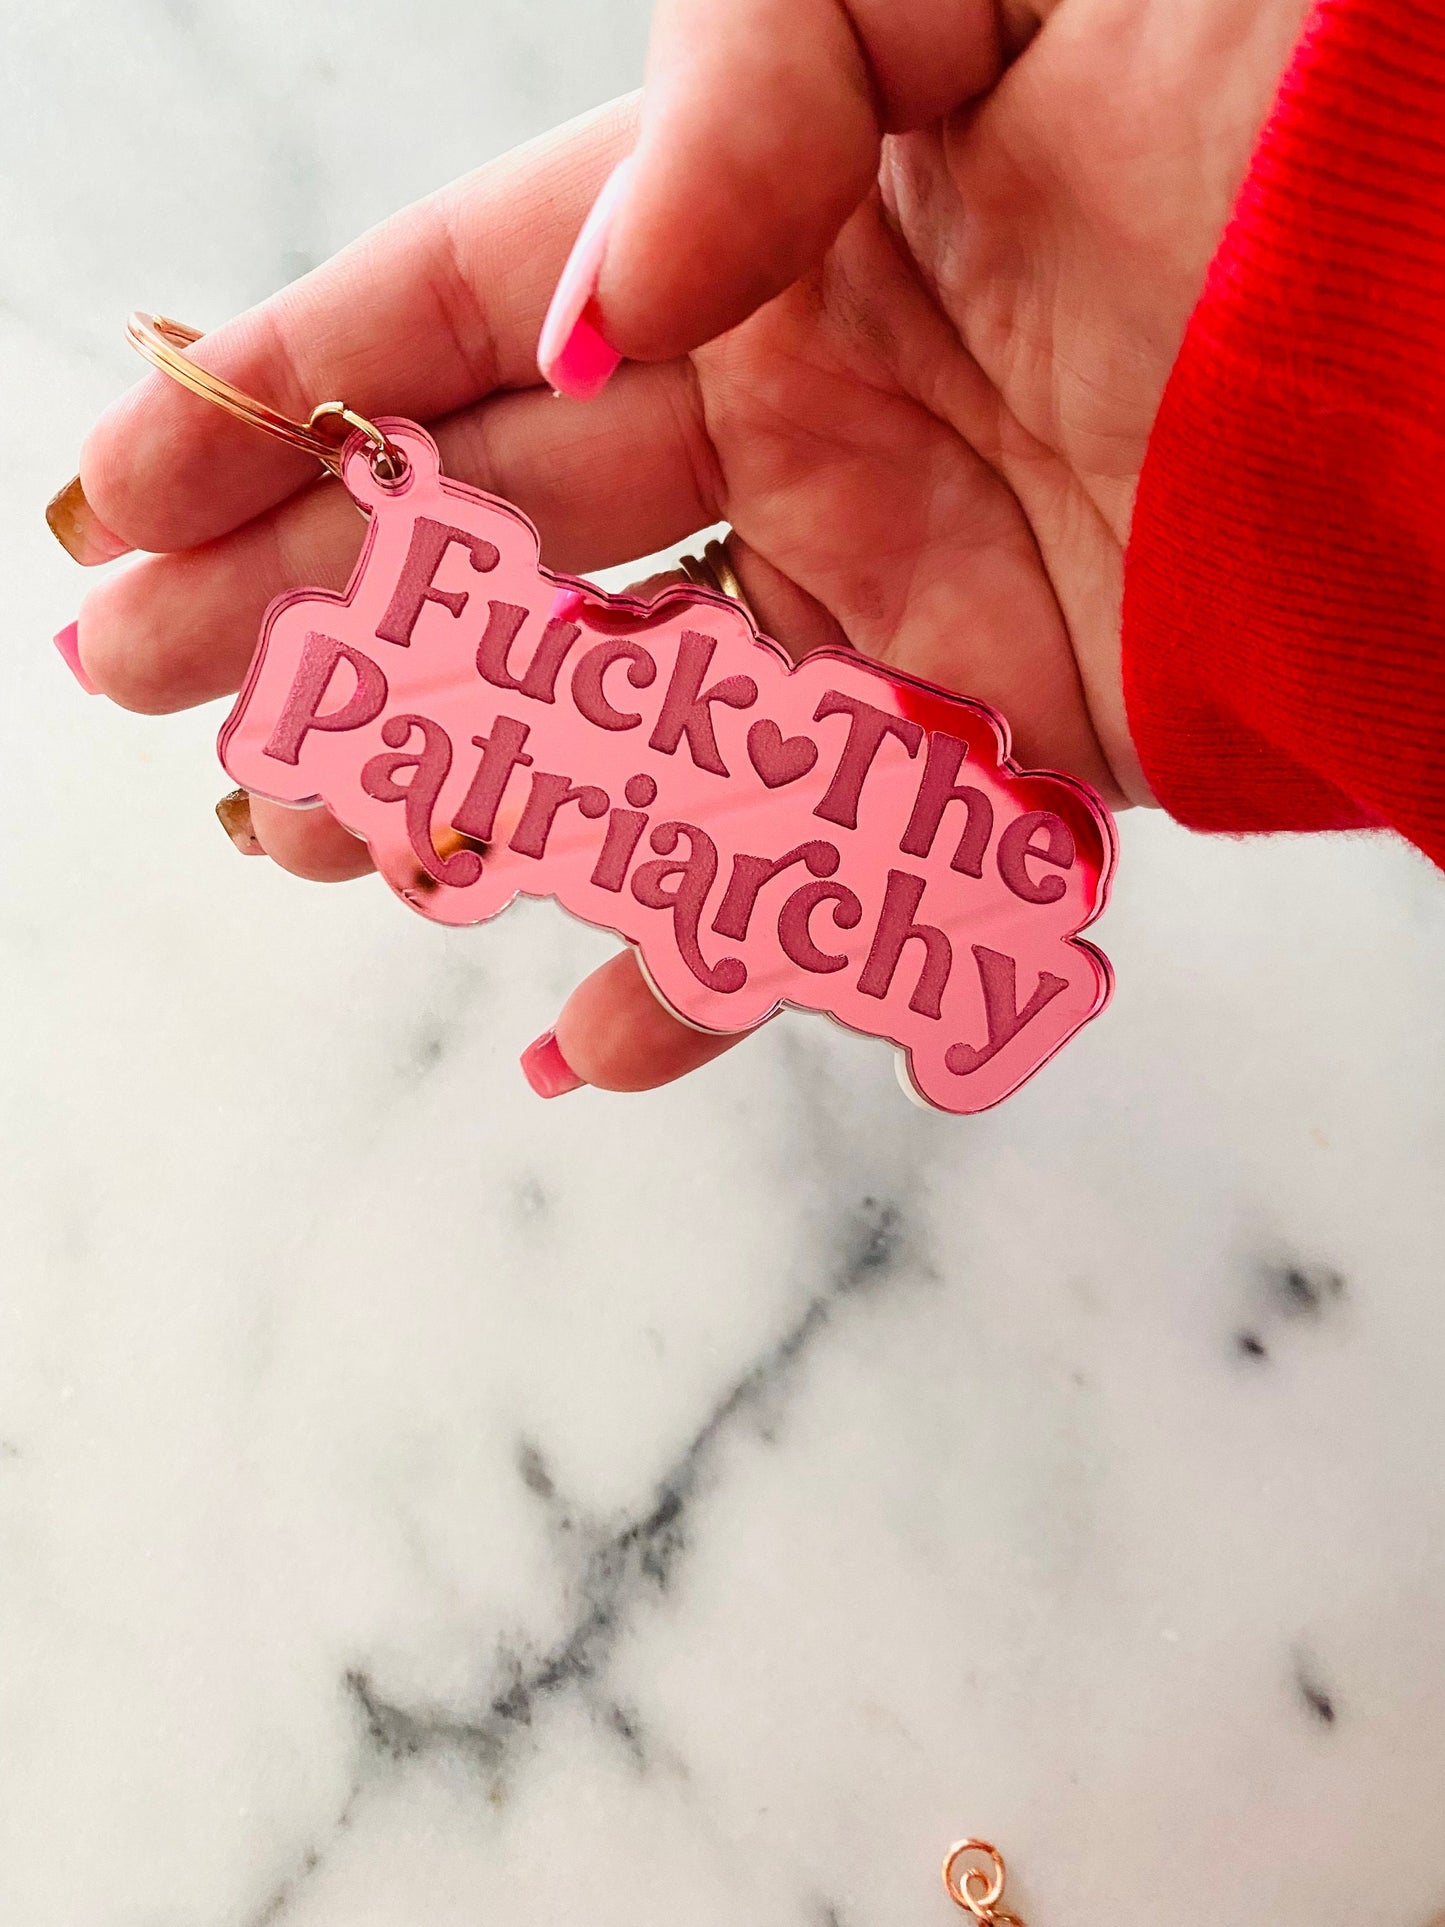 Engraved Fuck the patriarchy motel keychain